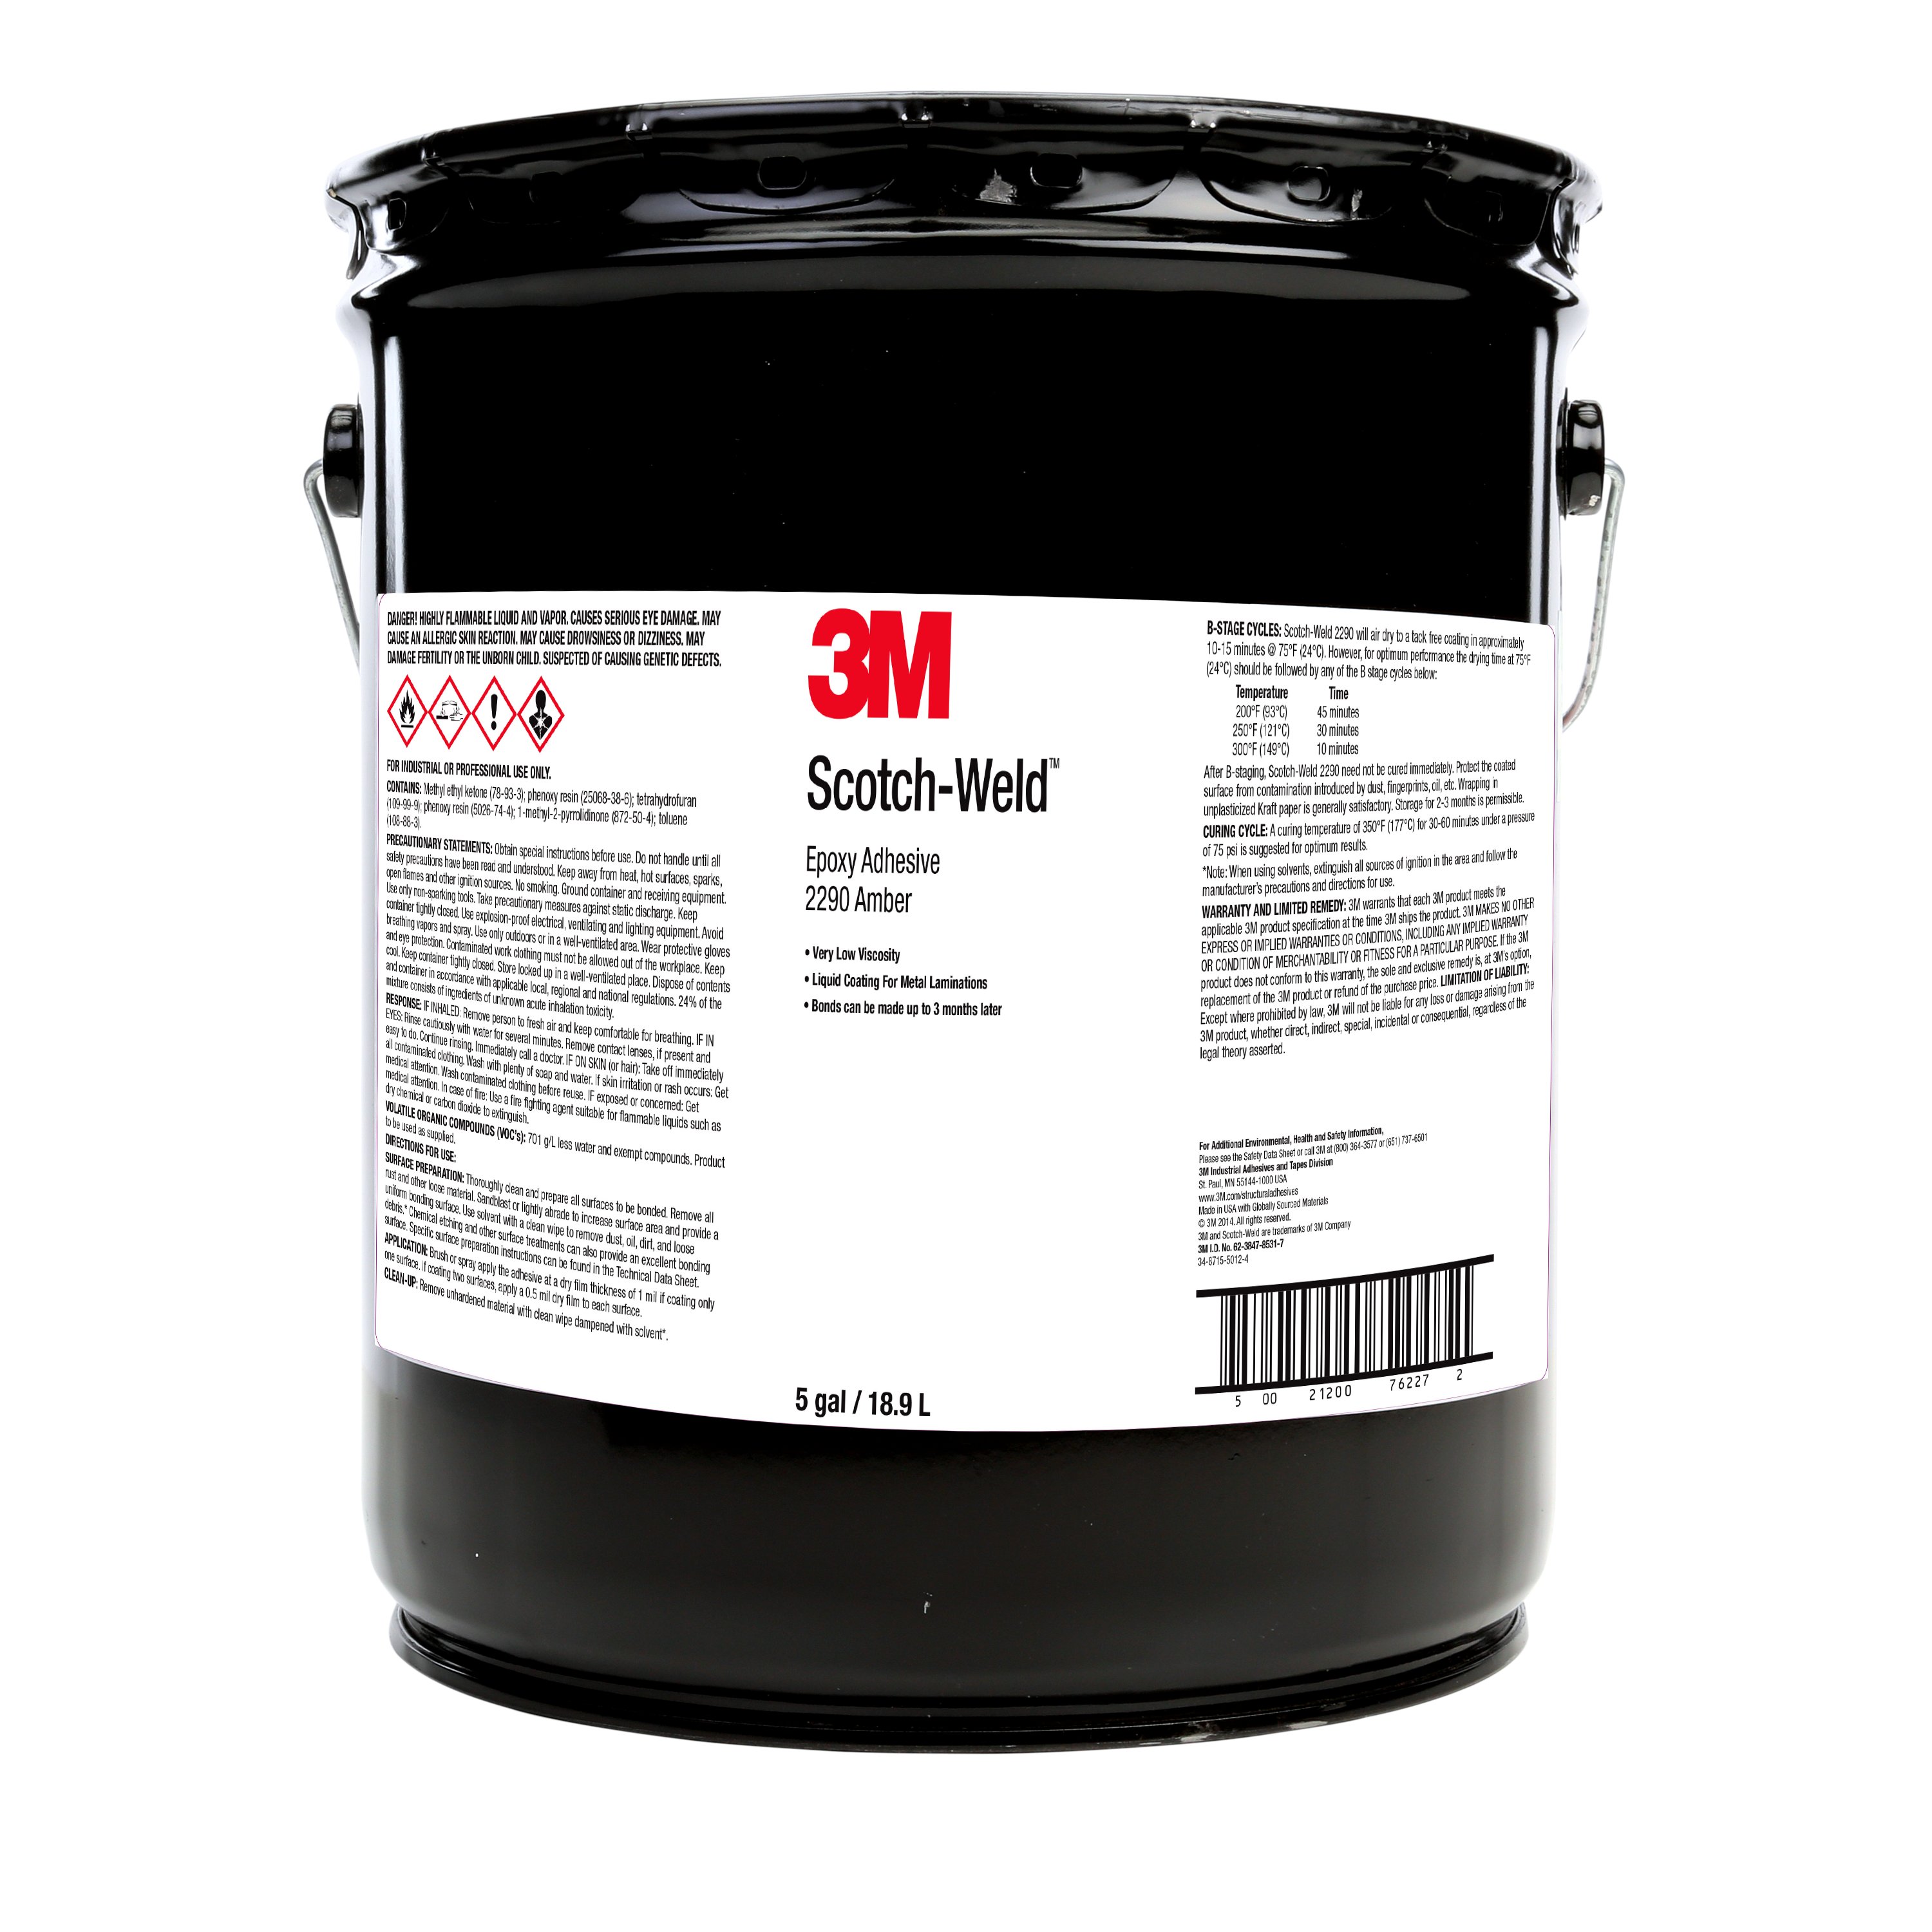 3M™ Scotch-Weld™ Epoxy Adhesive 2290 is designed to coat and bond metal substrates, including steel and aluminum